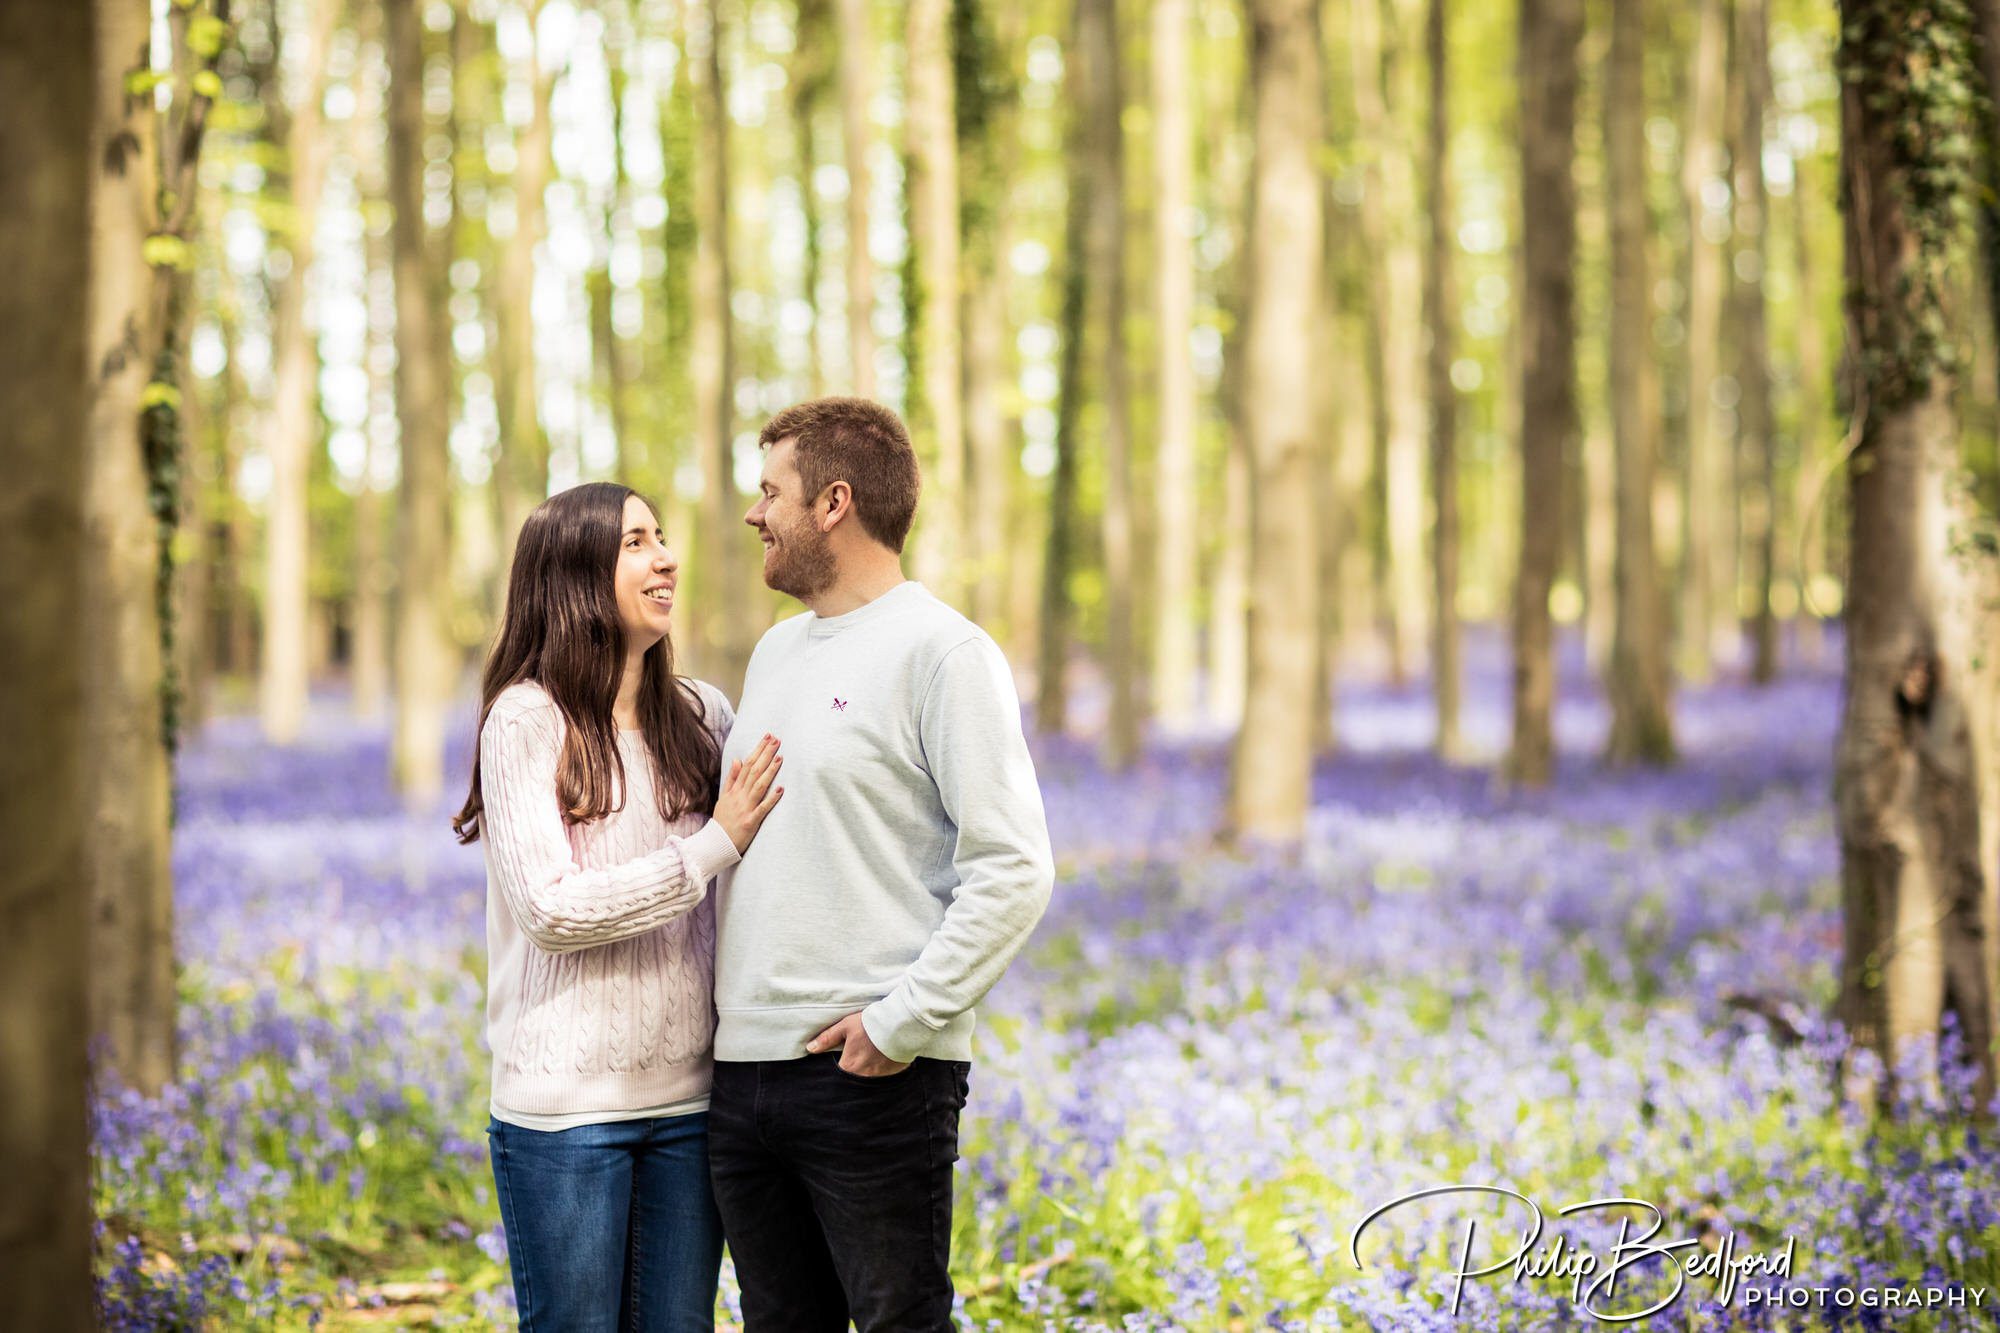 Bluebells Engagement Shoot, Worthing, West Sussex